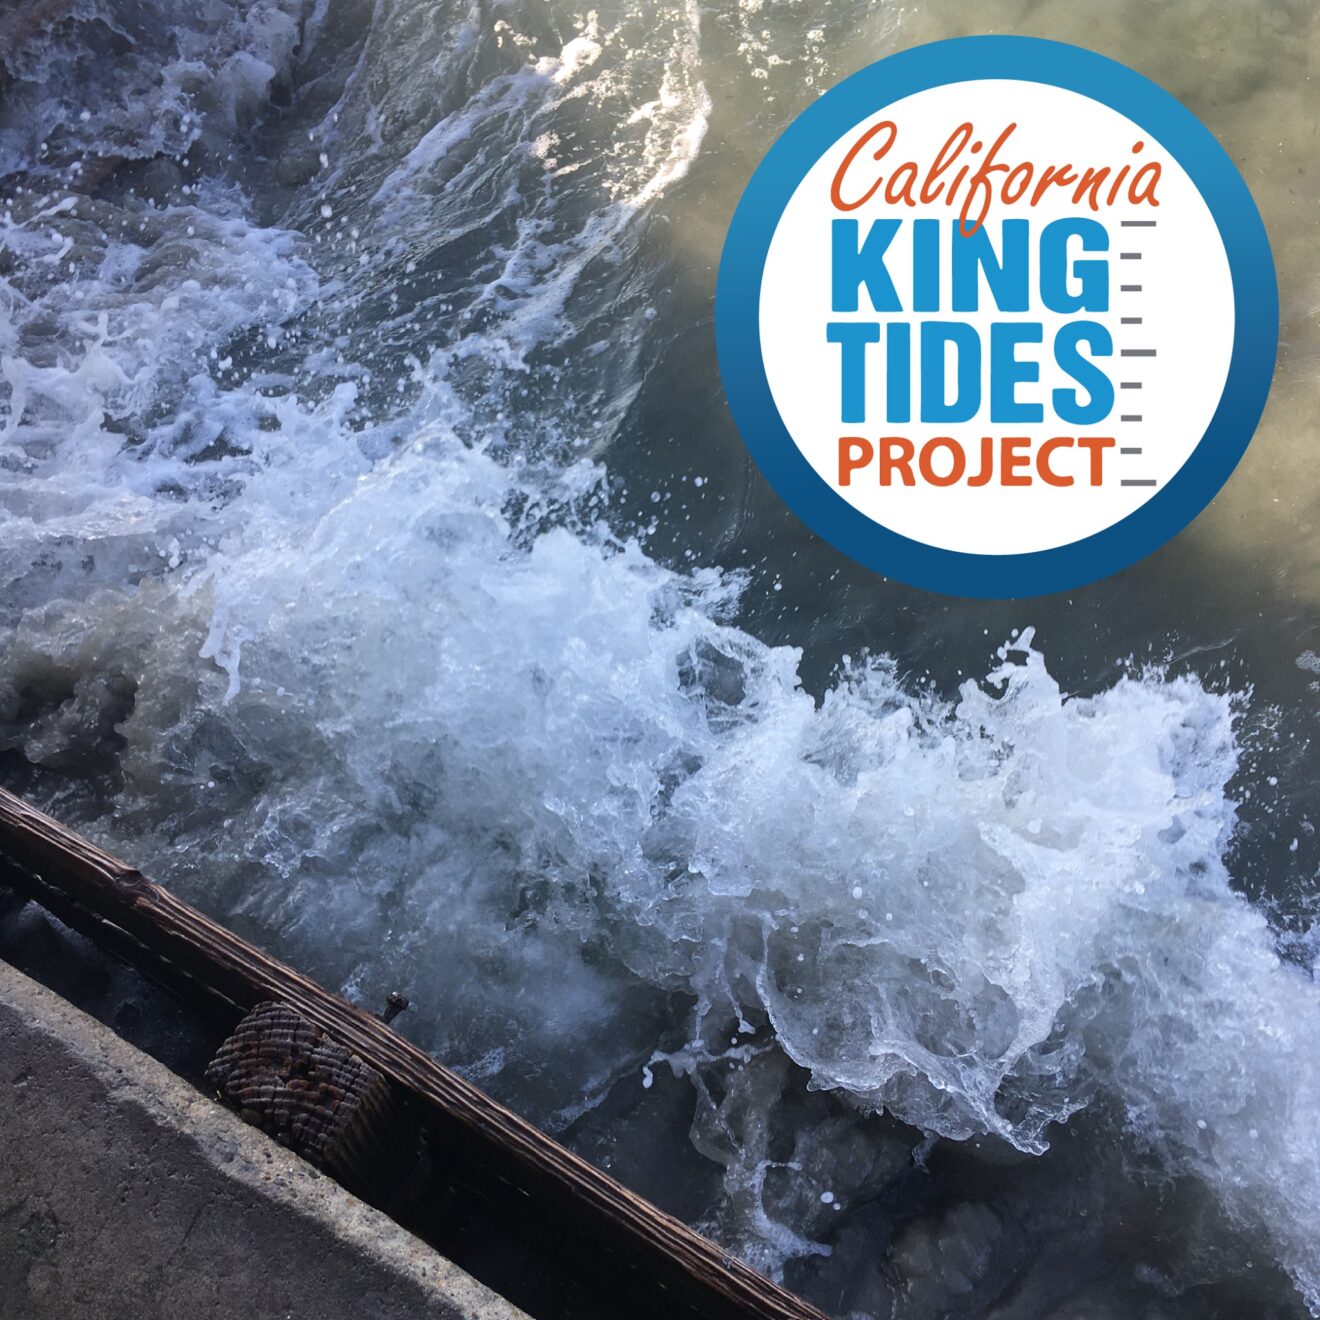 California King Tides Project Friends of Rose Creek